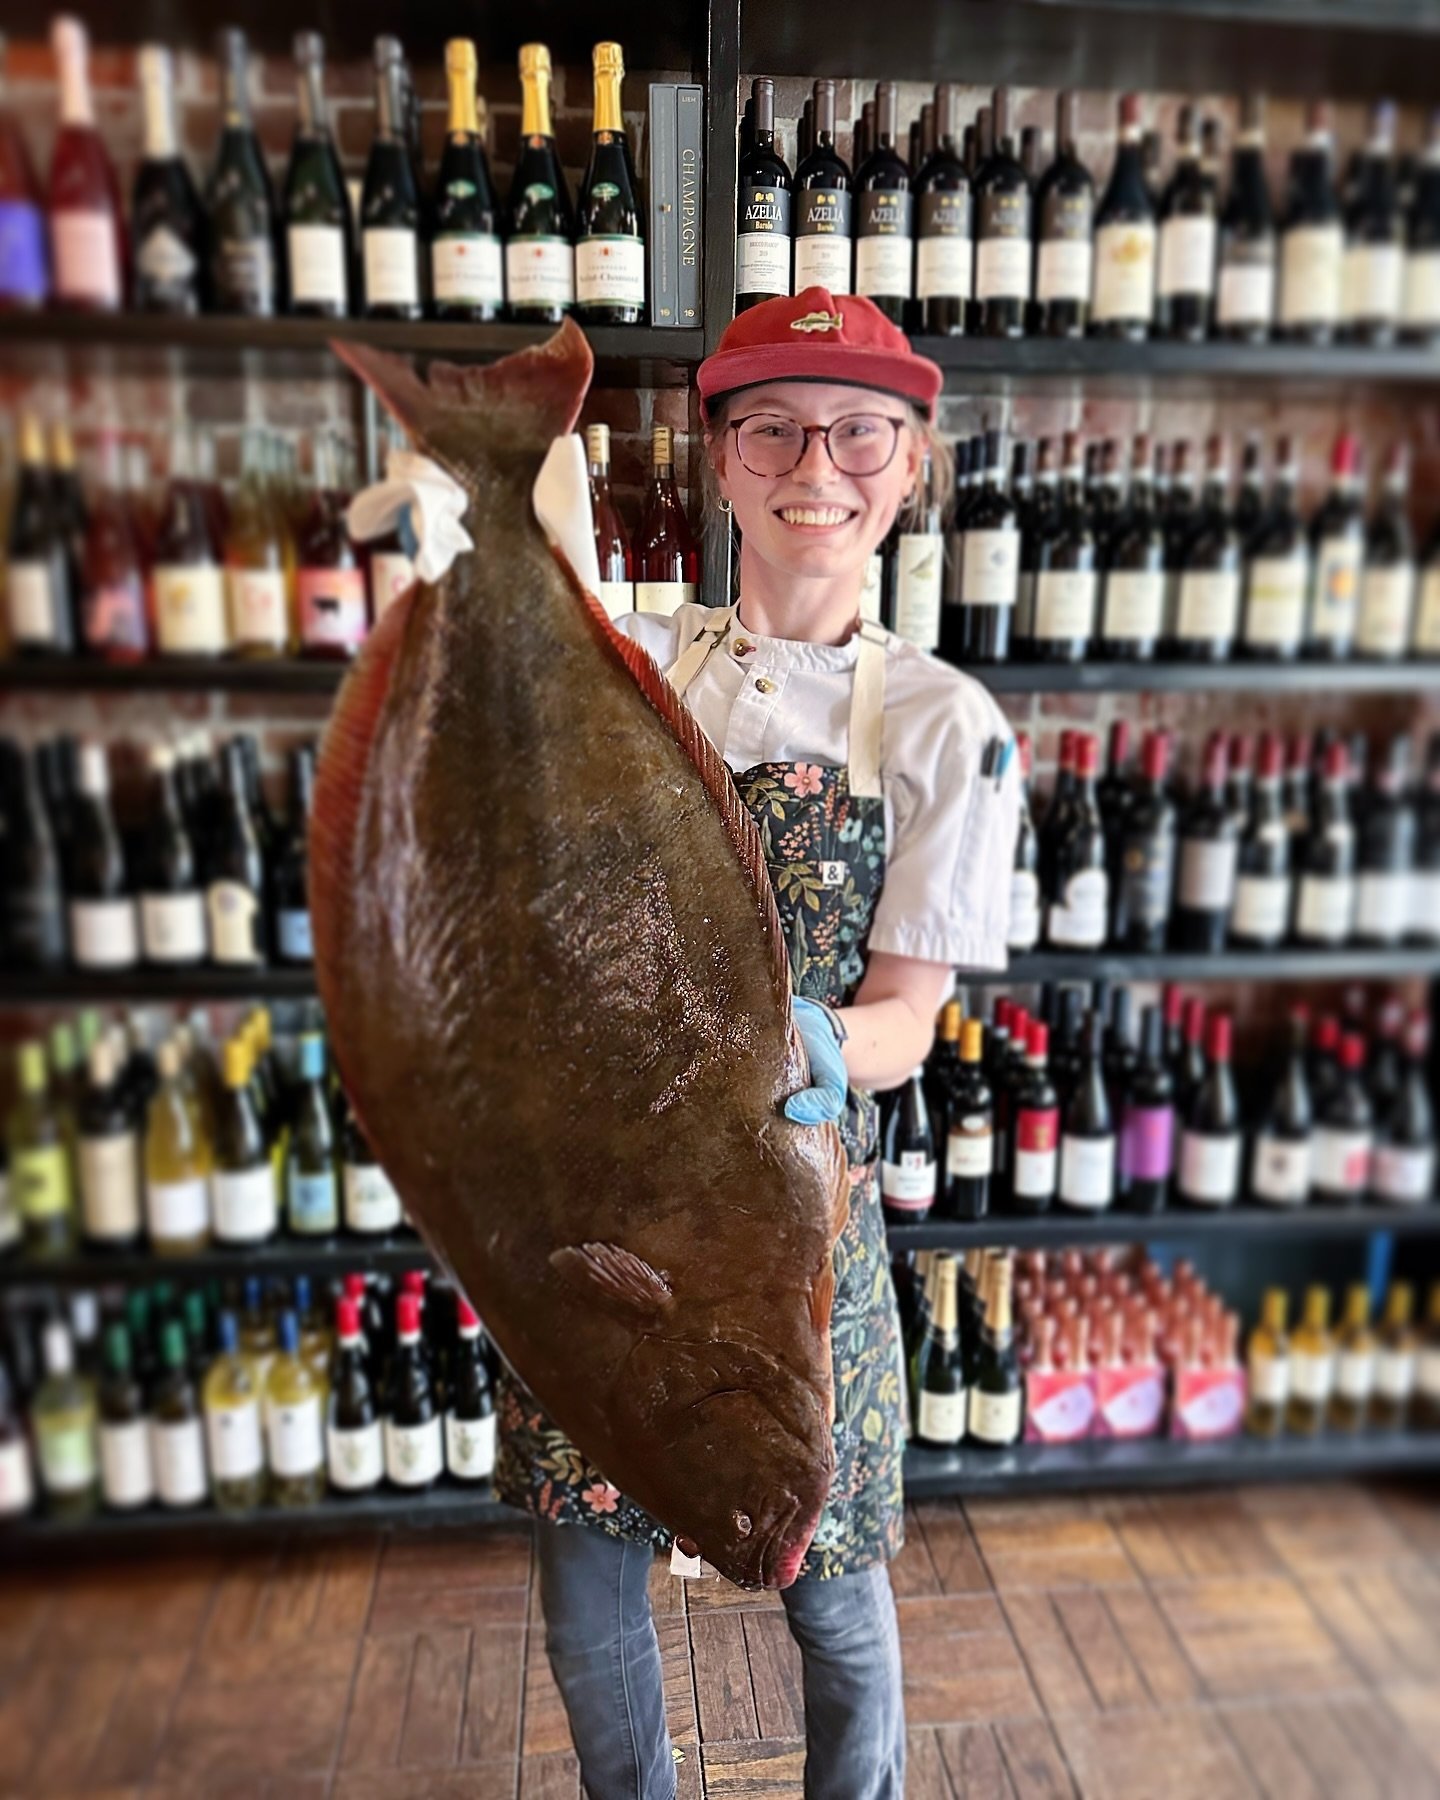 Chef @audrey_la_grace loves halibut season! Committed to only serving excellent fish, these halibut are wild-caught + flown in. Come see what the chefs have planned for all of!

Reservations can be made right through the link in our bio, we are also 